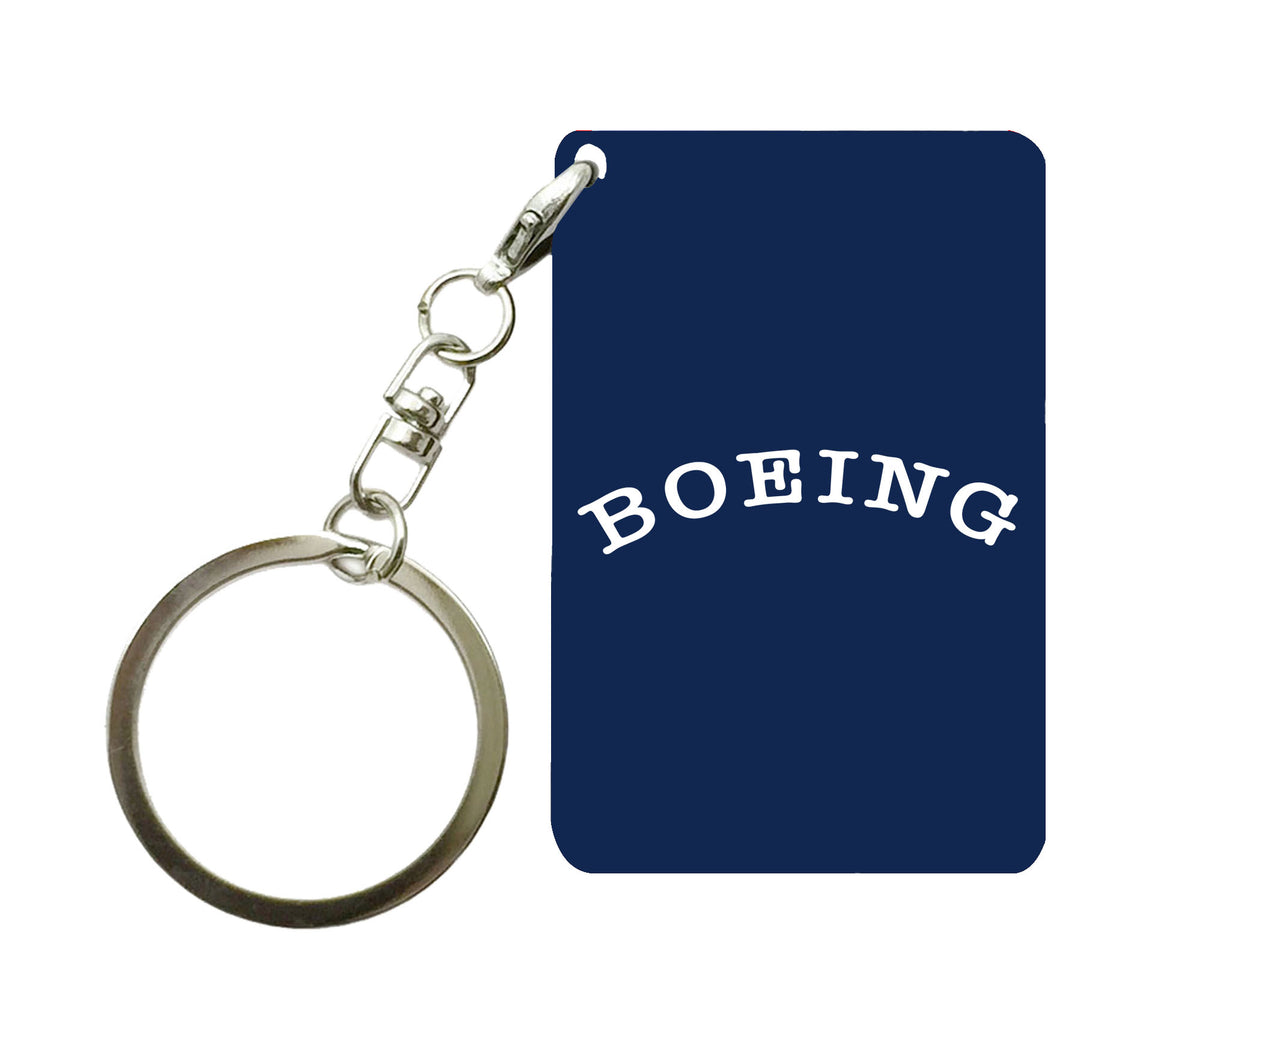 Special BOEING Text Designed Key Chains